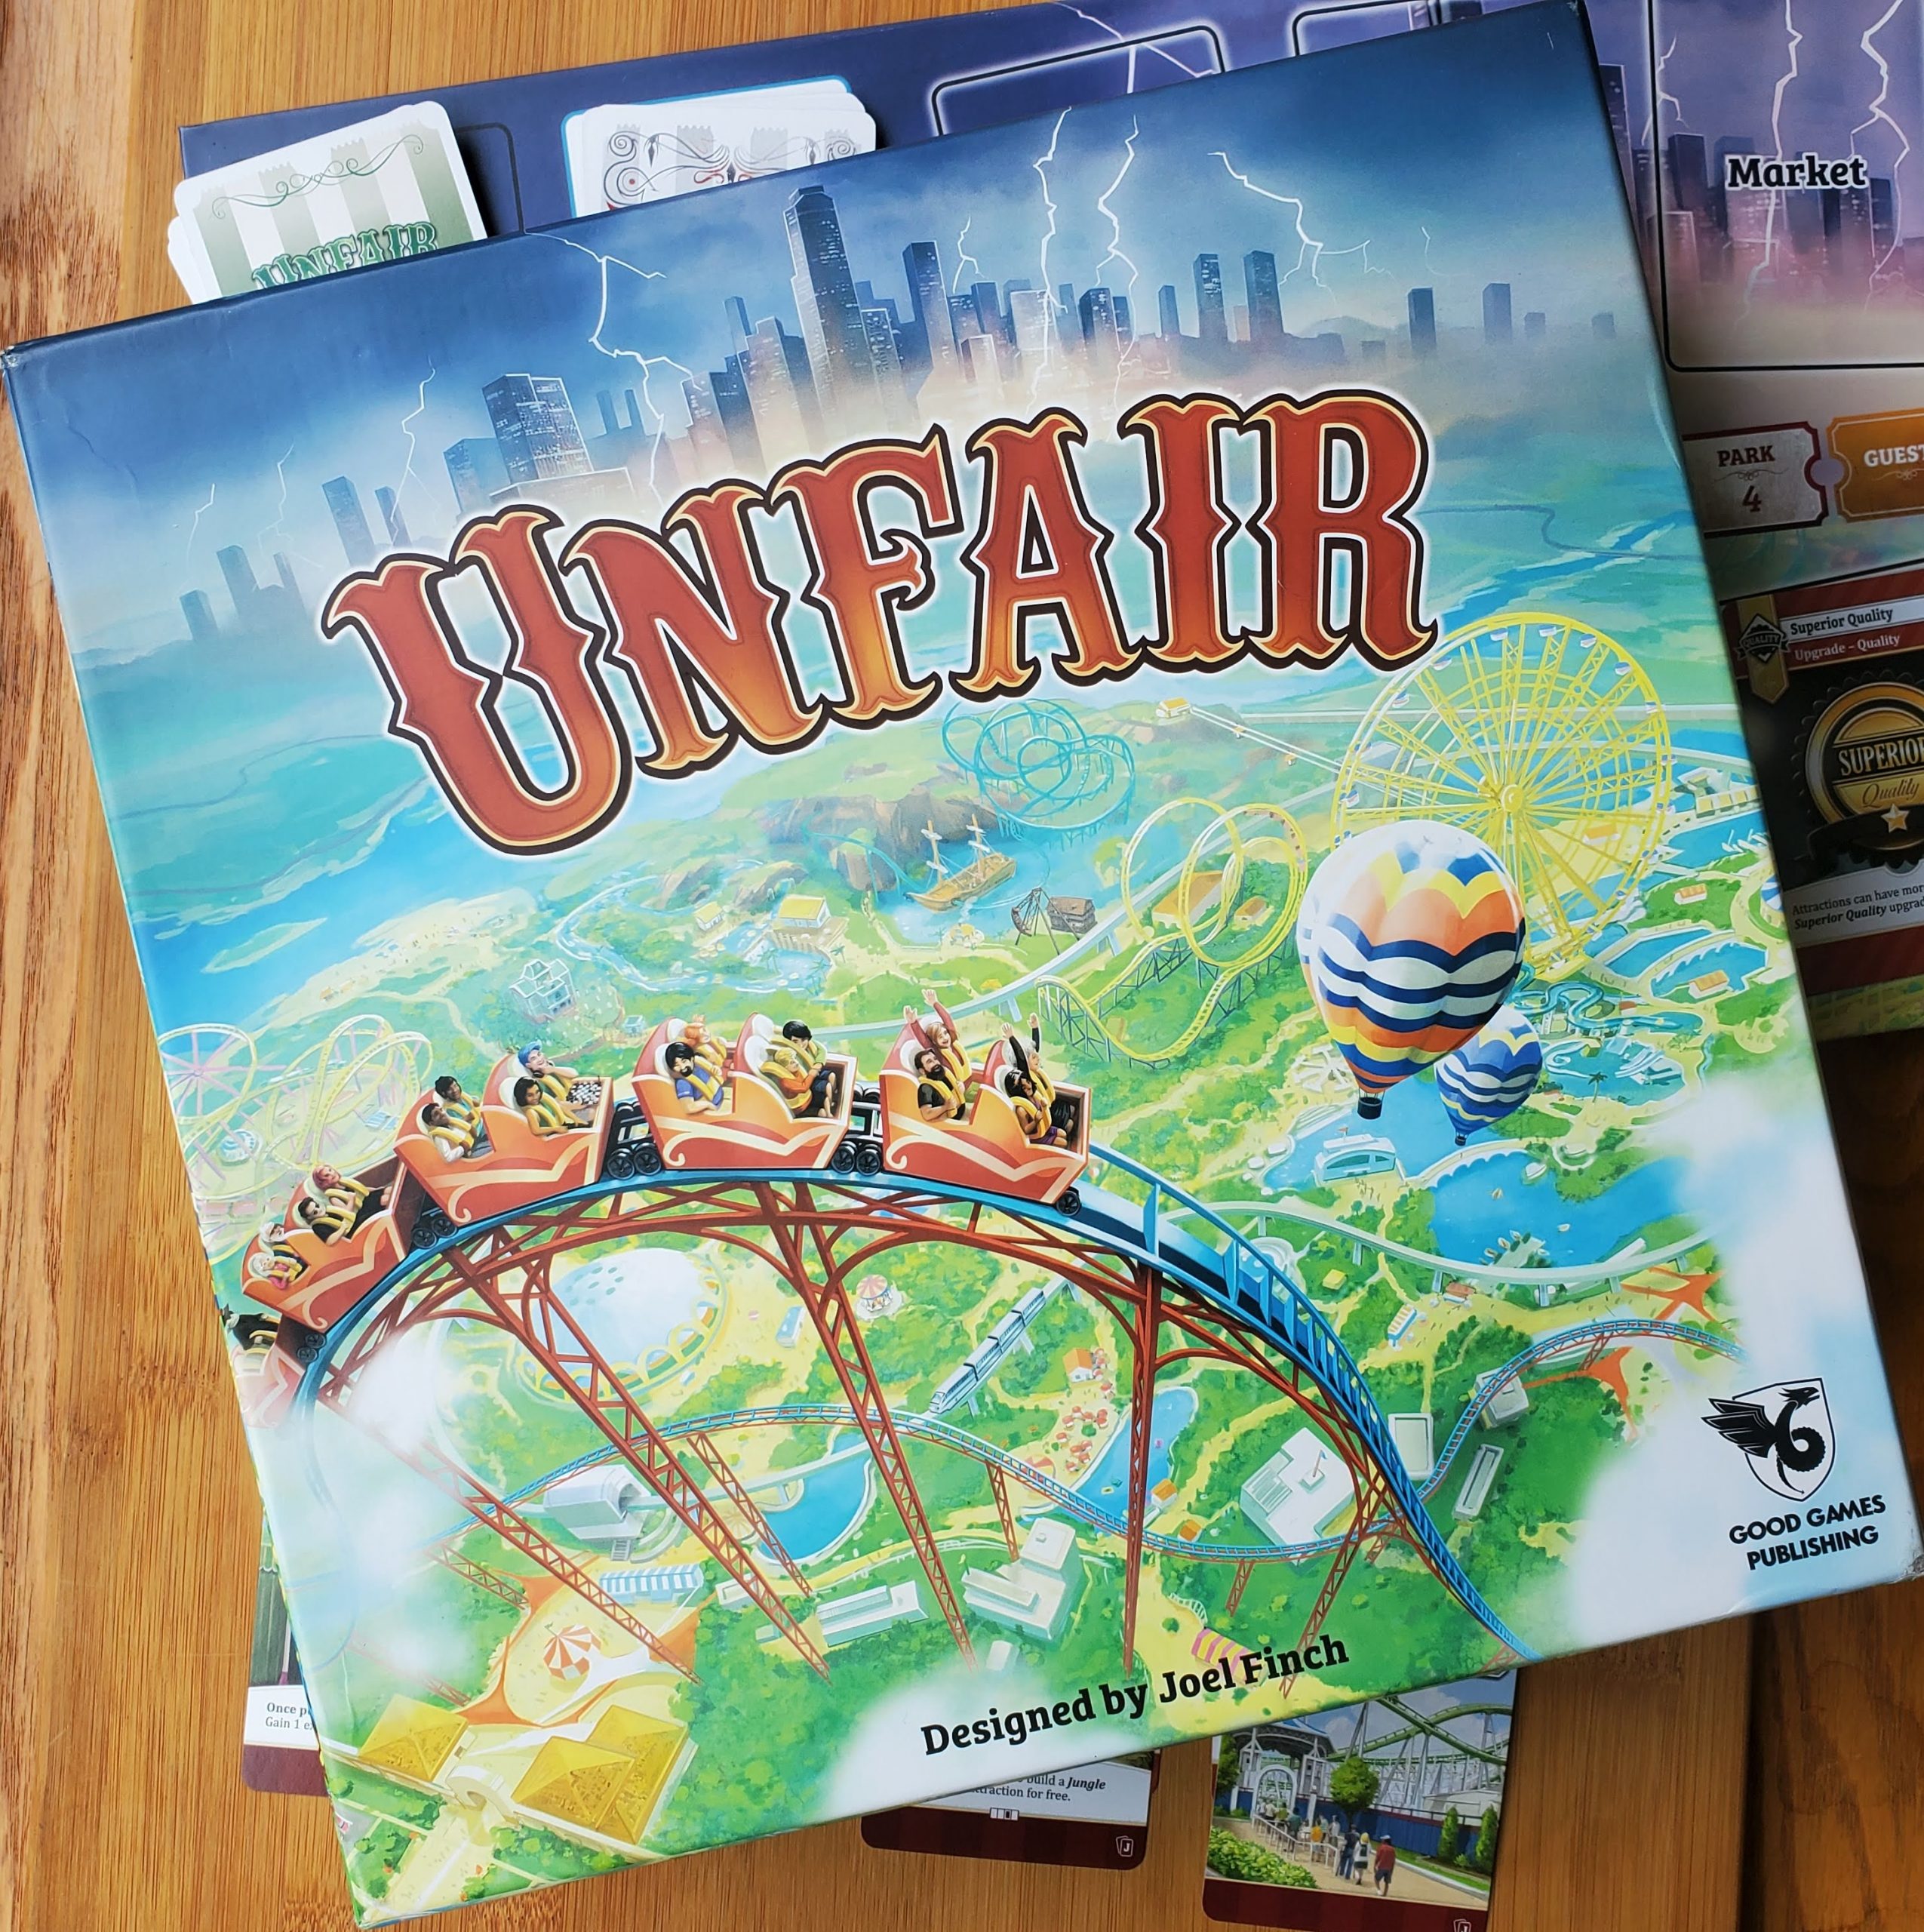 Board games to check out if you're looking for two player games